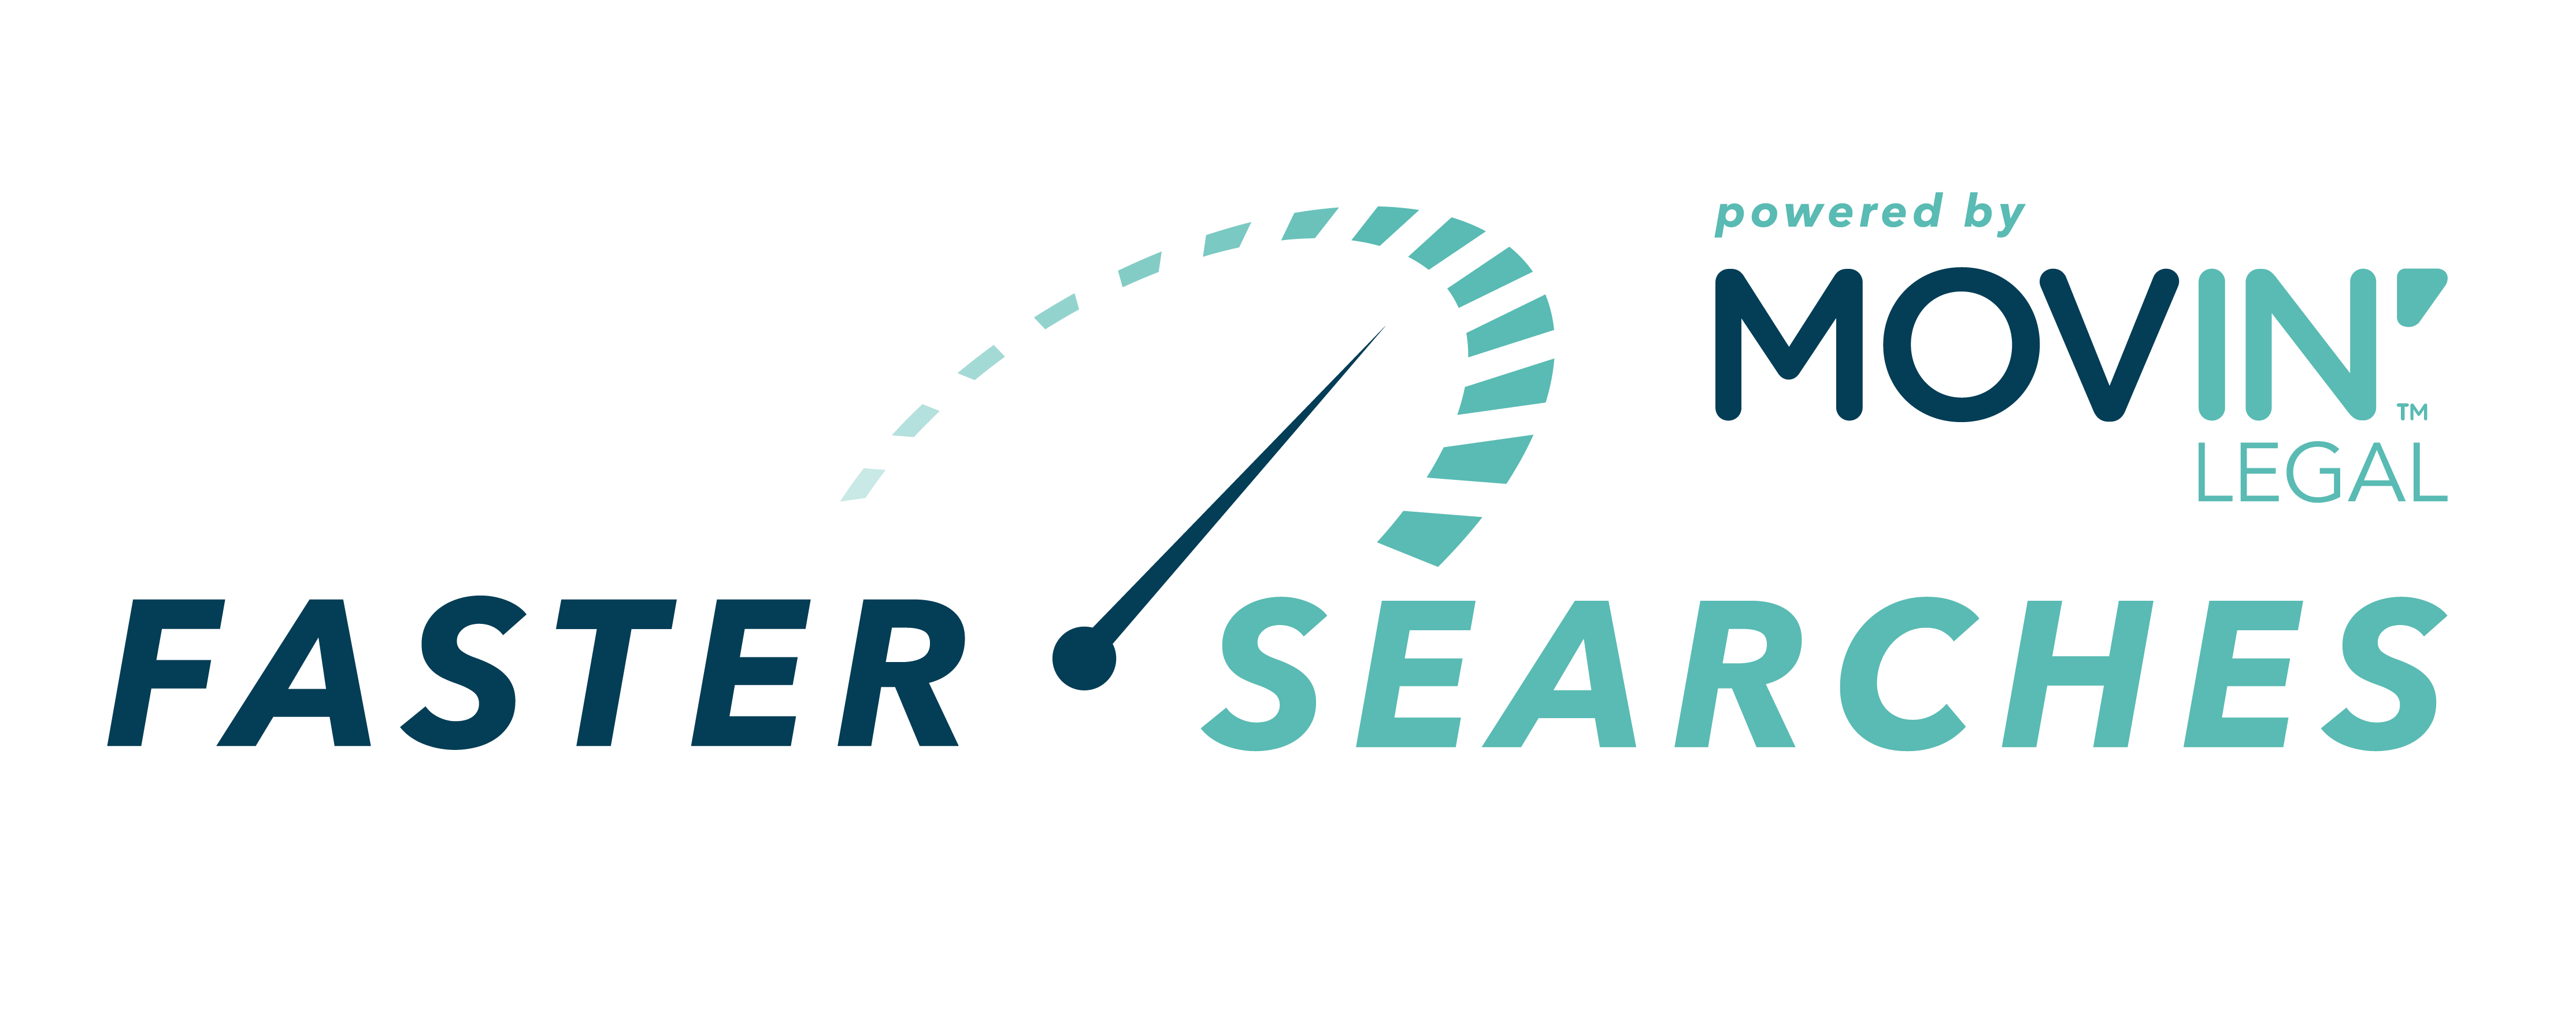 faster searches 03